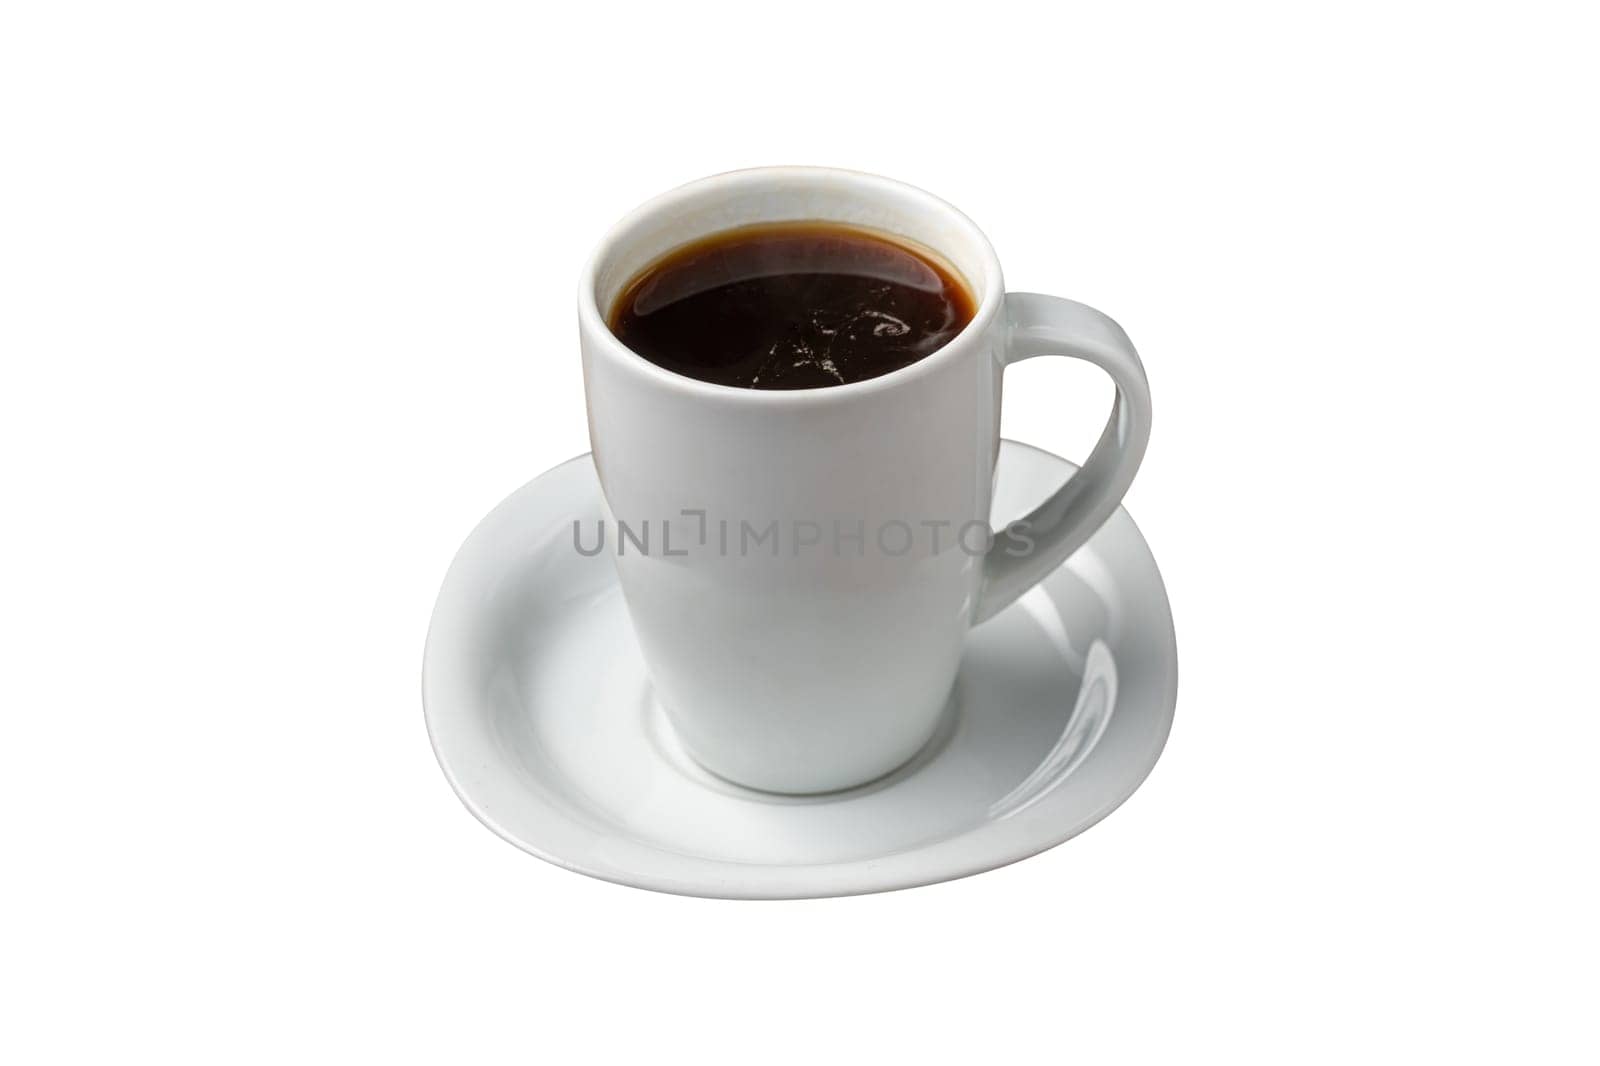 Filter coffee brewed in a filter coffee machine in a white porcelain cup